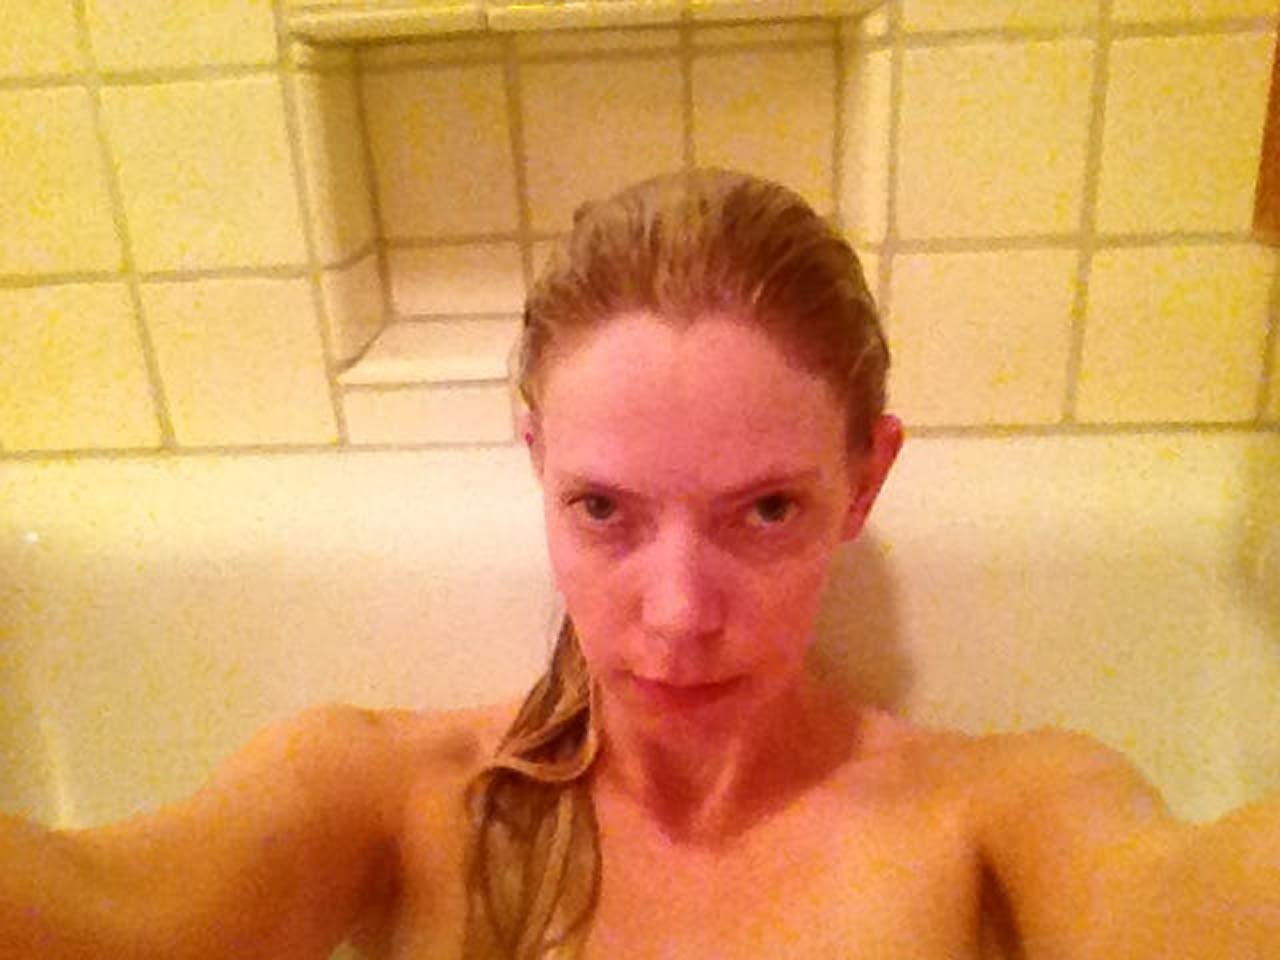 Riki Lindhome Nude Leaked Photos Scandal Planet